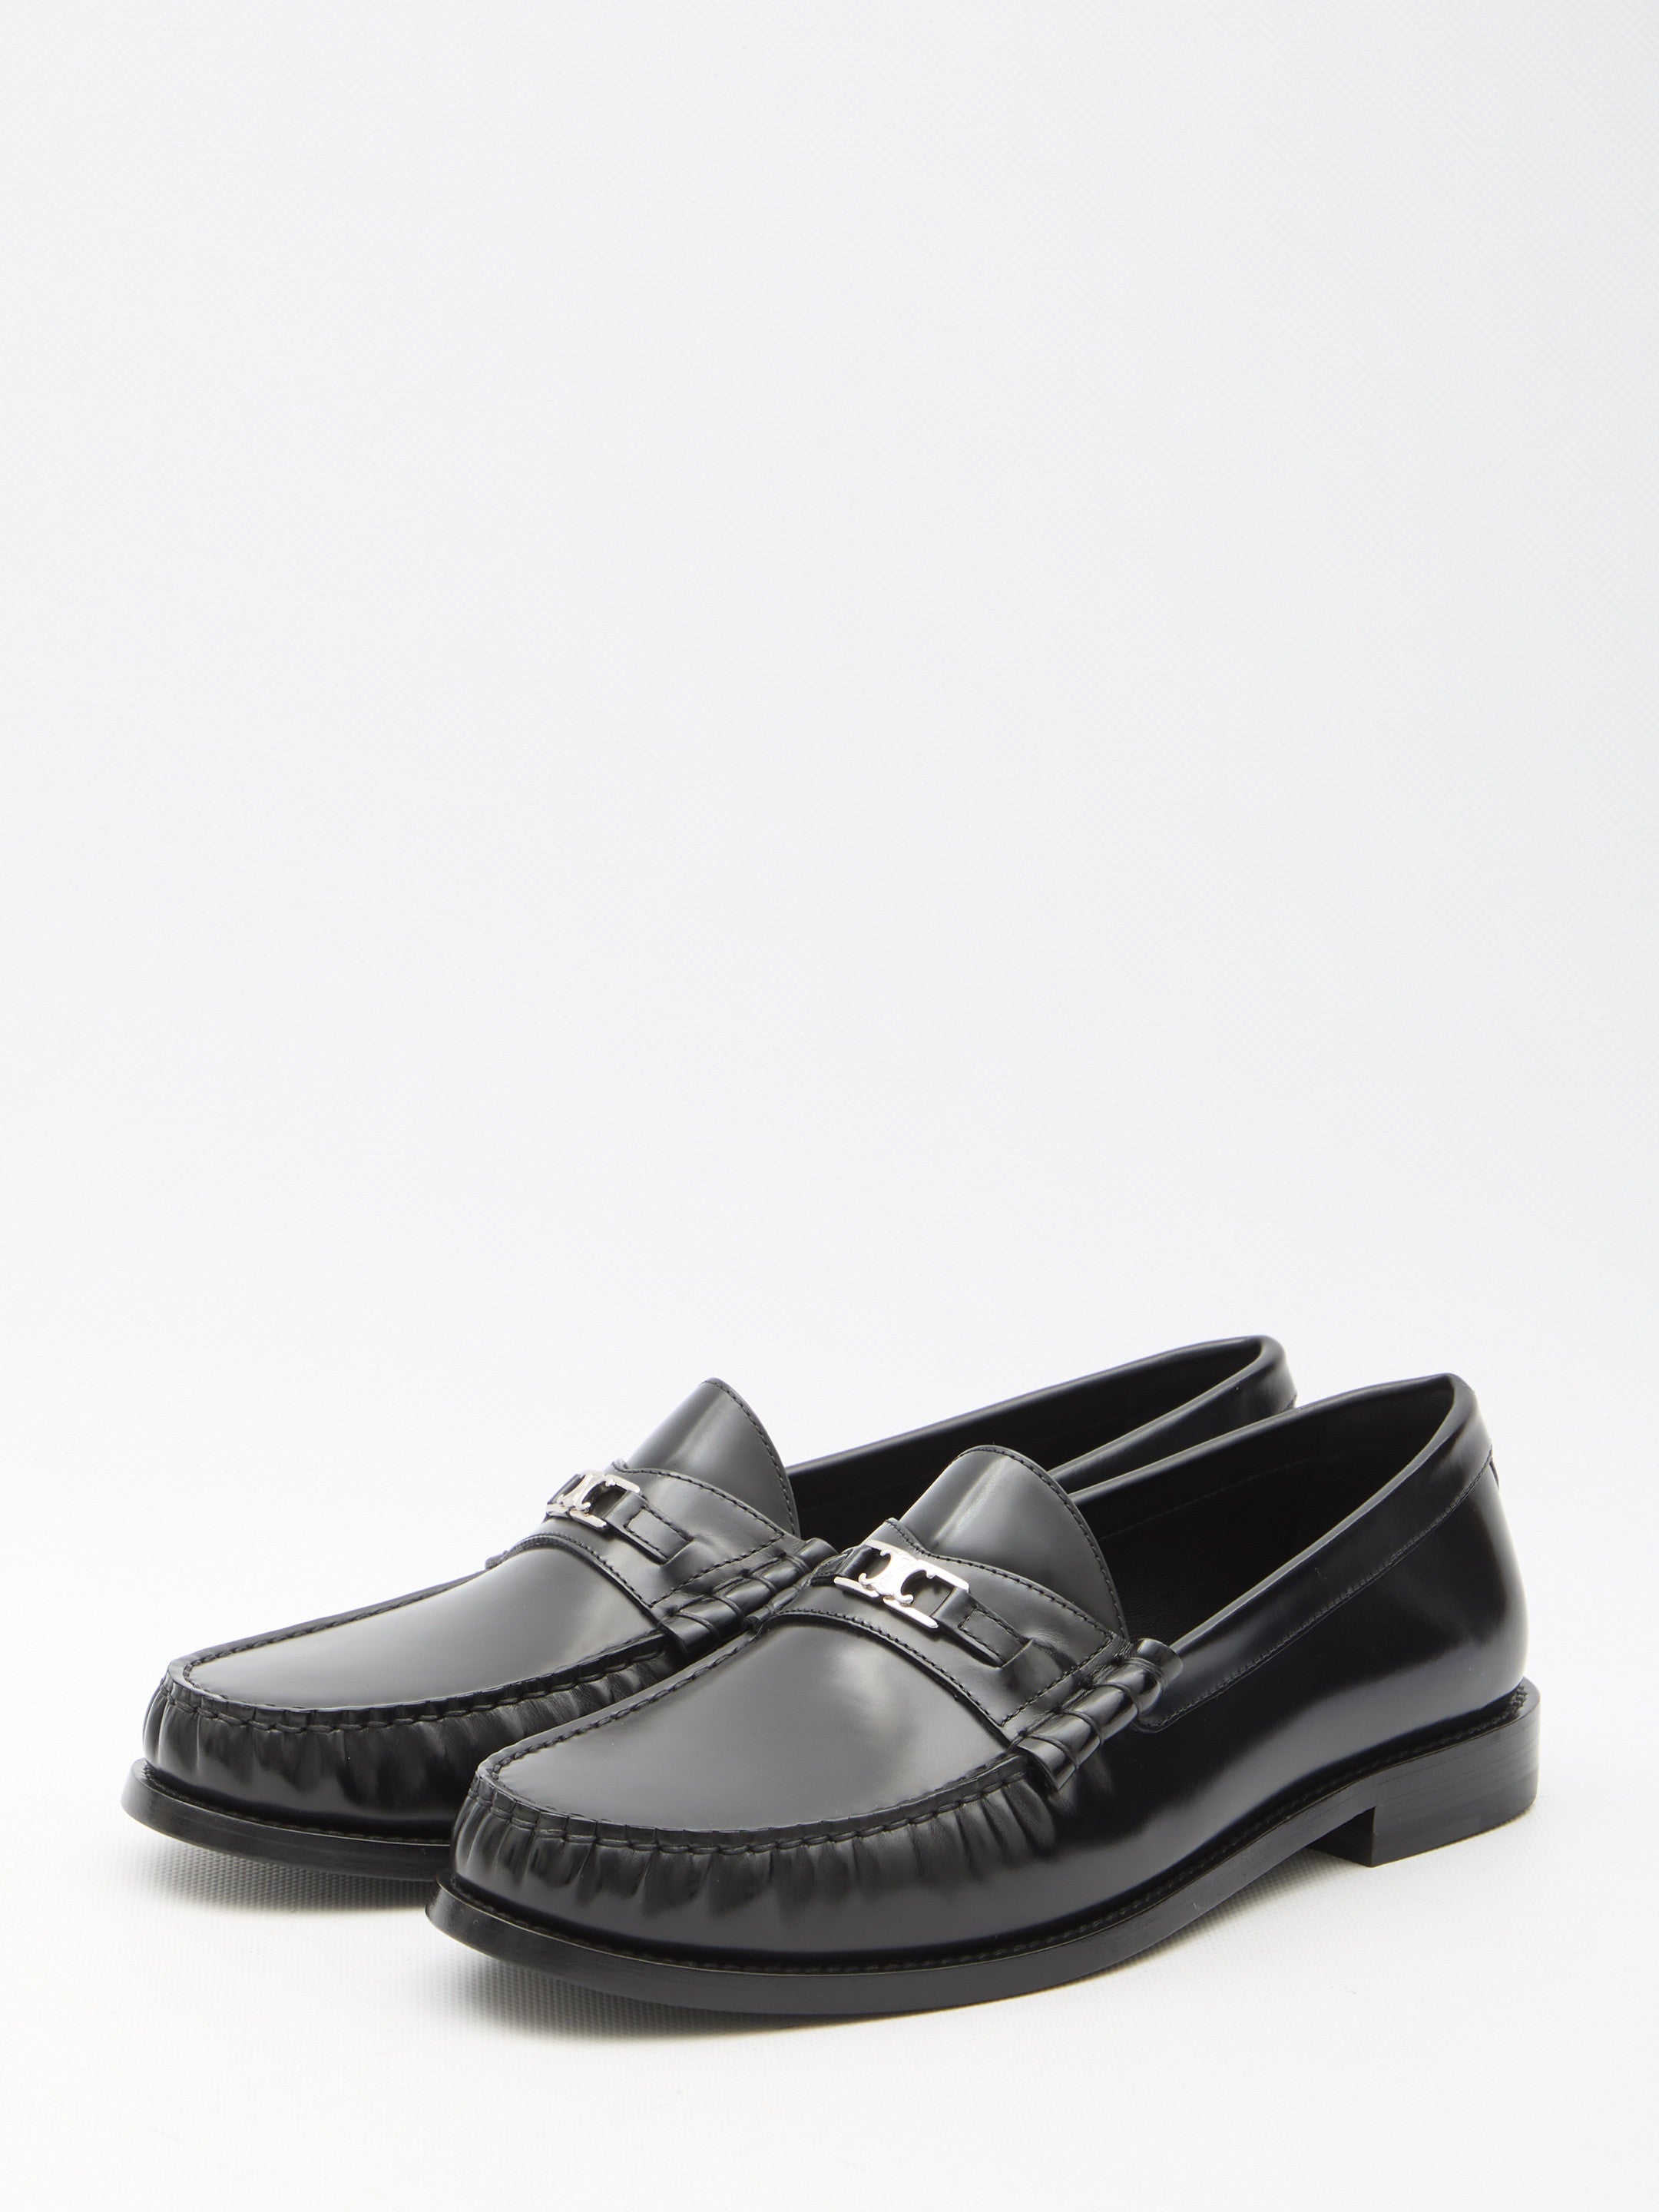 CELINE-OUTLET-SALE-Triomphe-Celine-Luco-loafers-Flache-Schuhe-ARCHIVE-COLLECTION-3.jpg